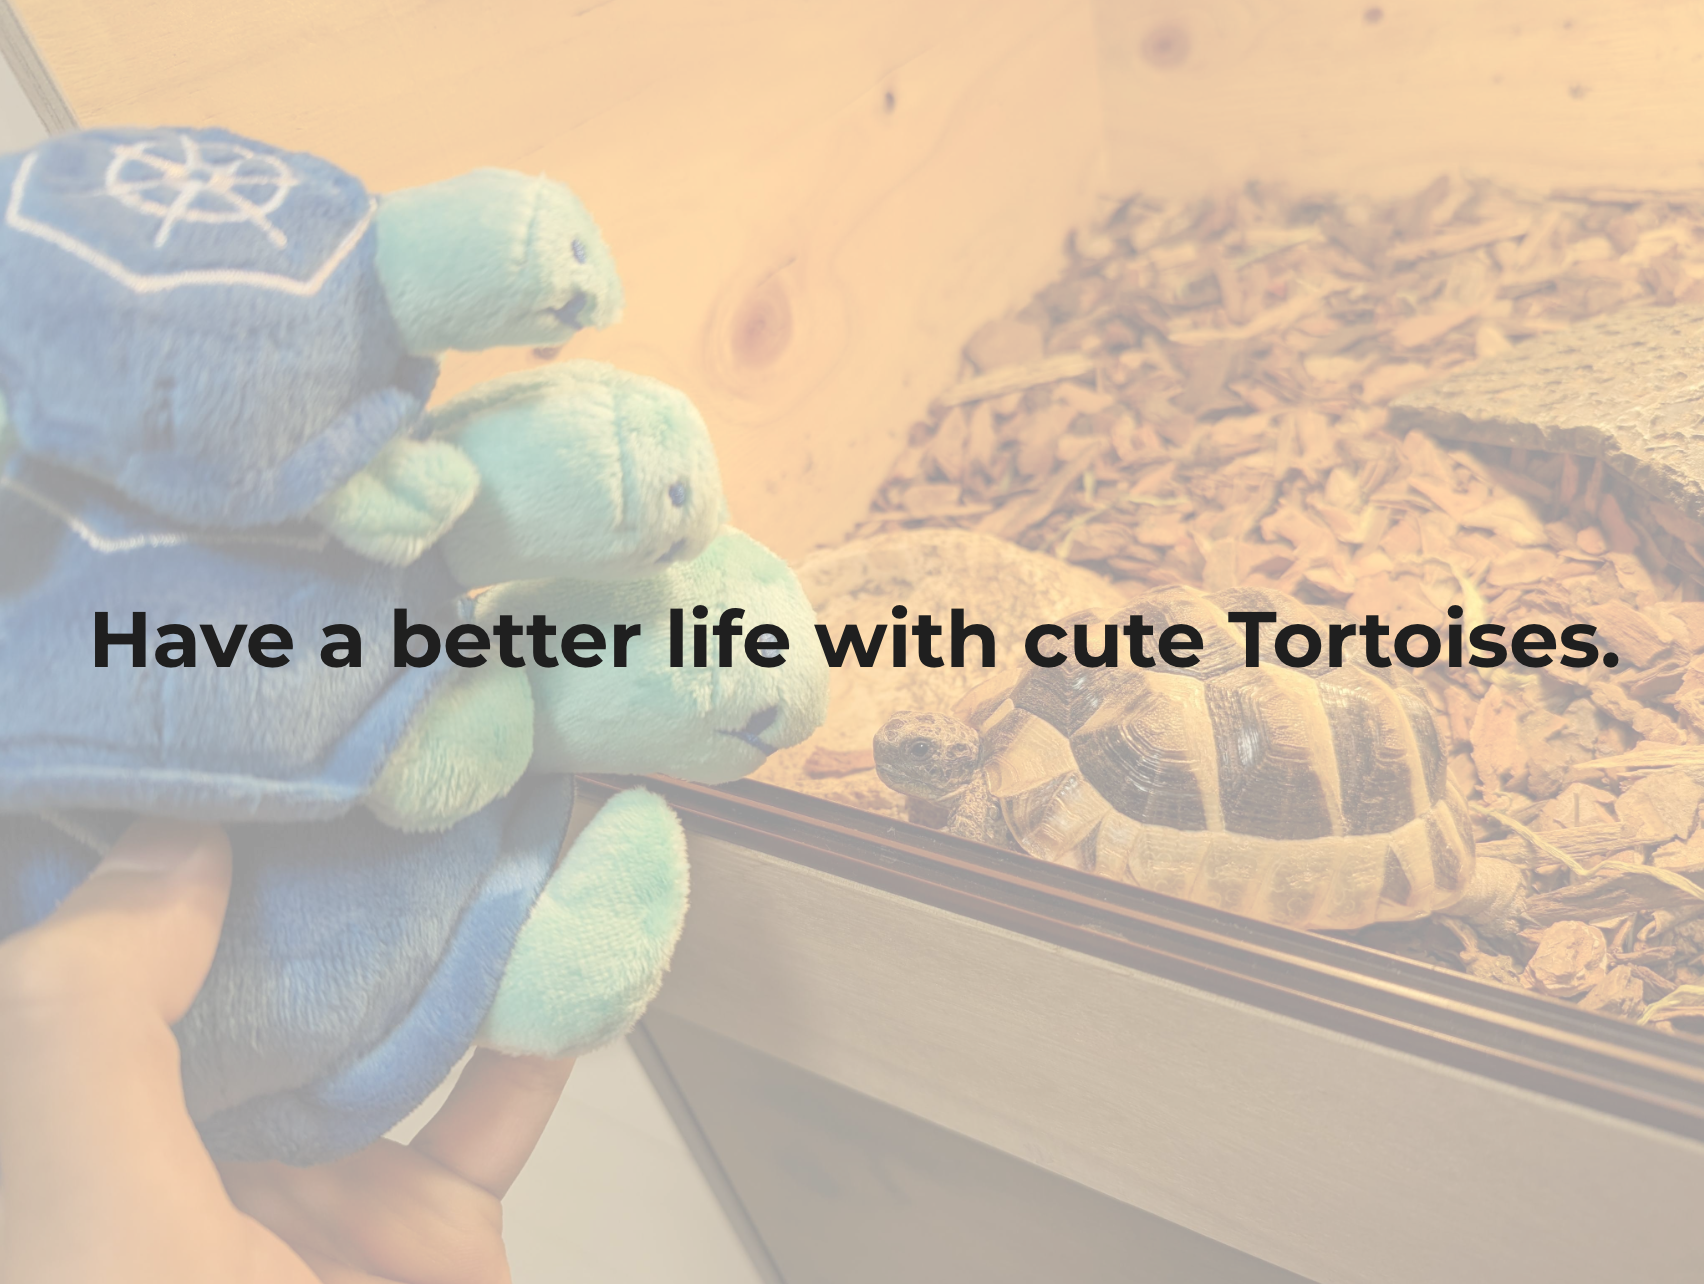 Have a better life with cute tortoises